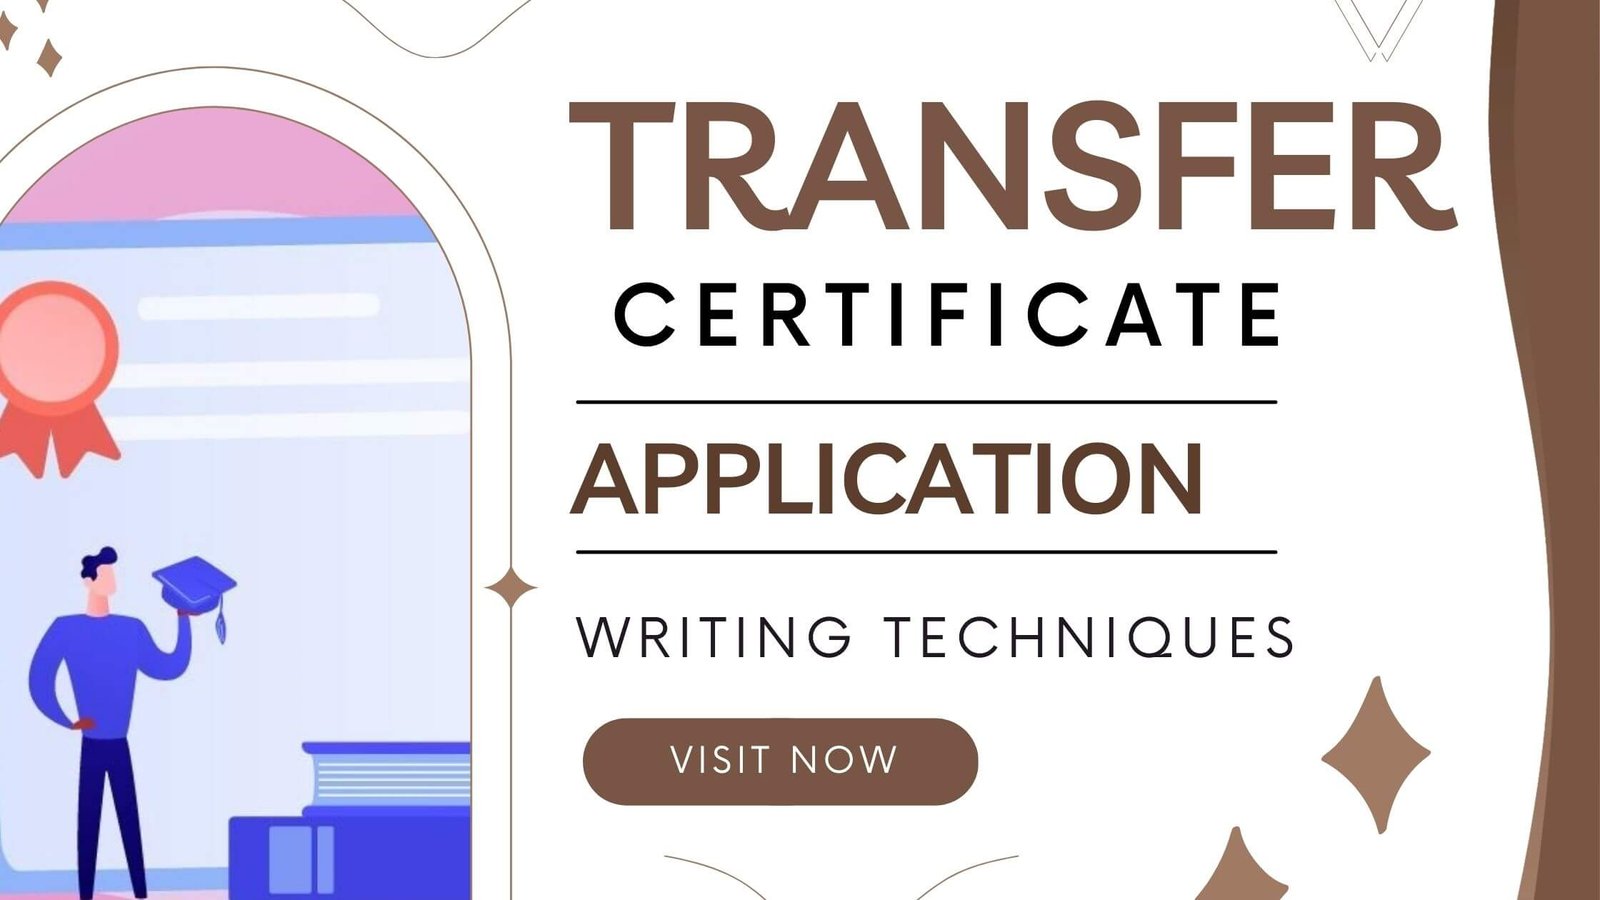 Effortless Application: 7 Steps to Obtain Your Transfer Certificate in Hindi from Raw Hindi with Ease